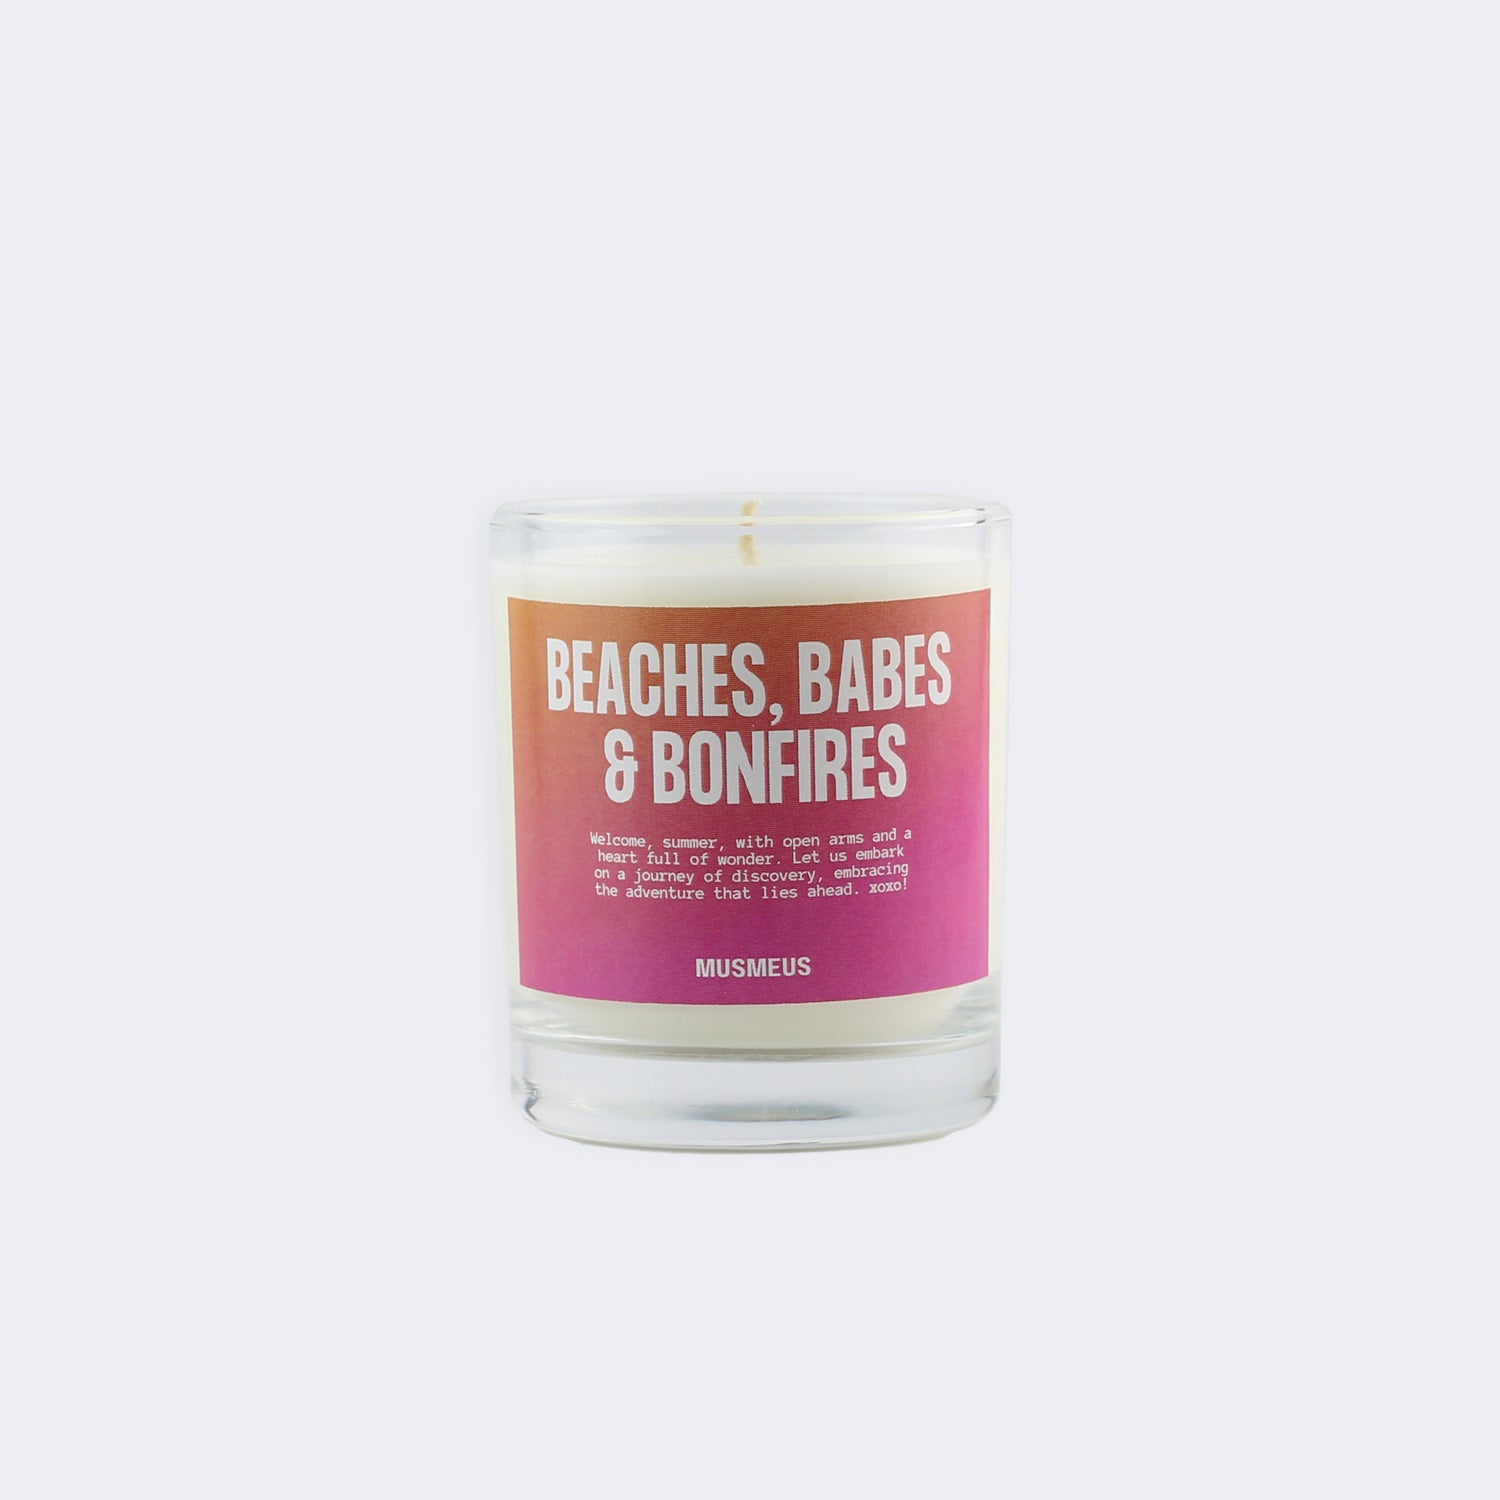 Beaches, Babes & Bonfires Soy Wax Scented Candle